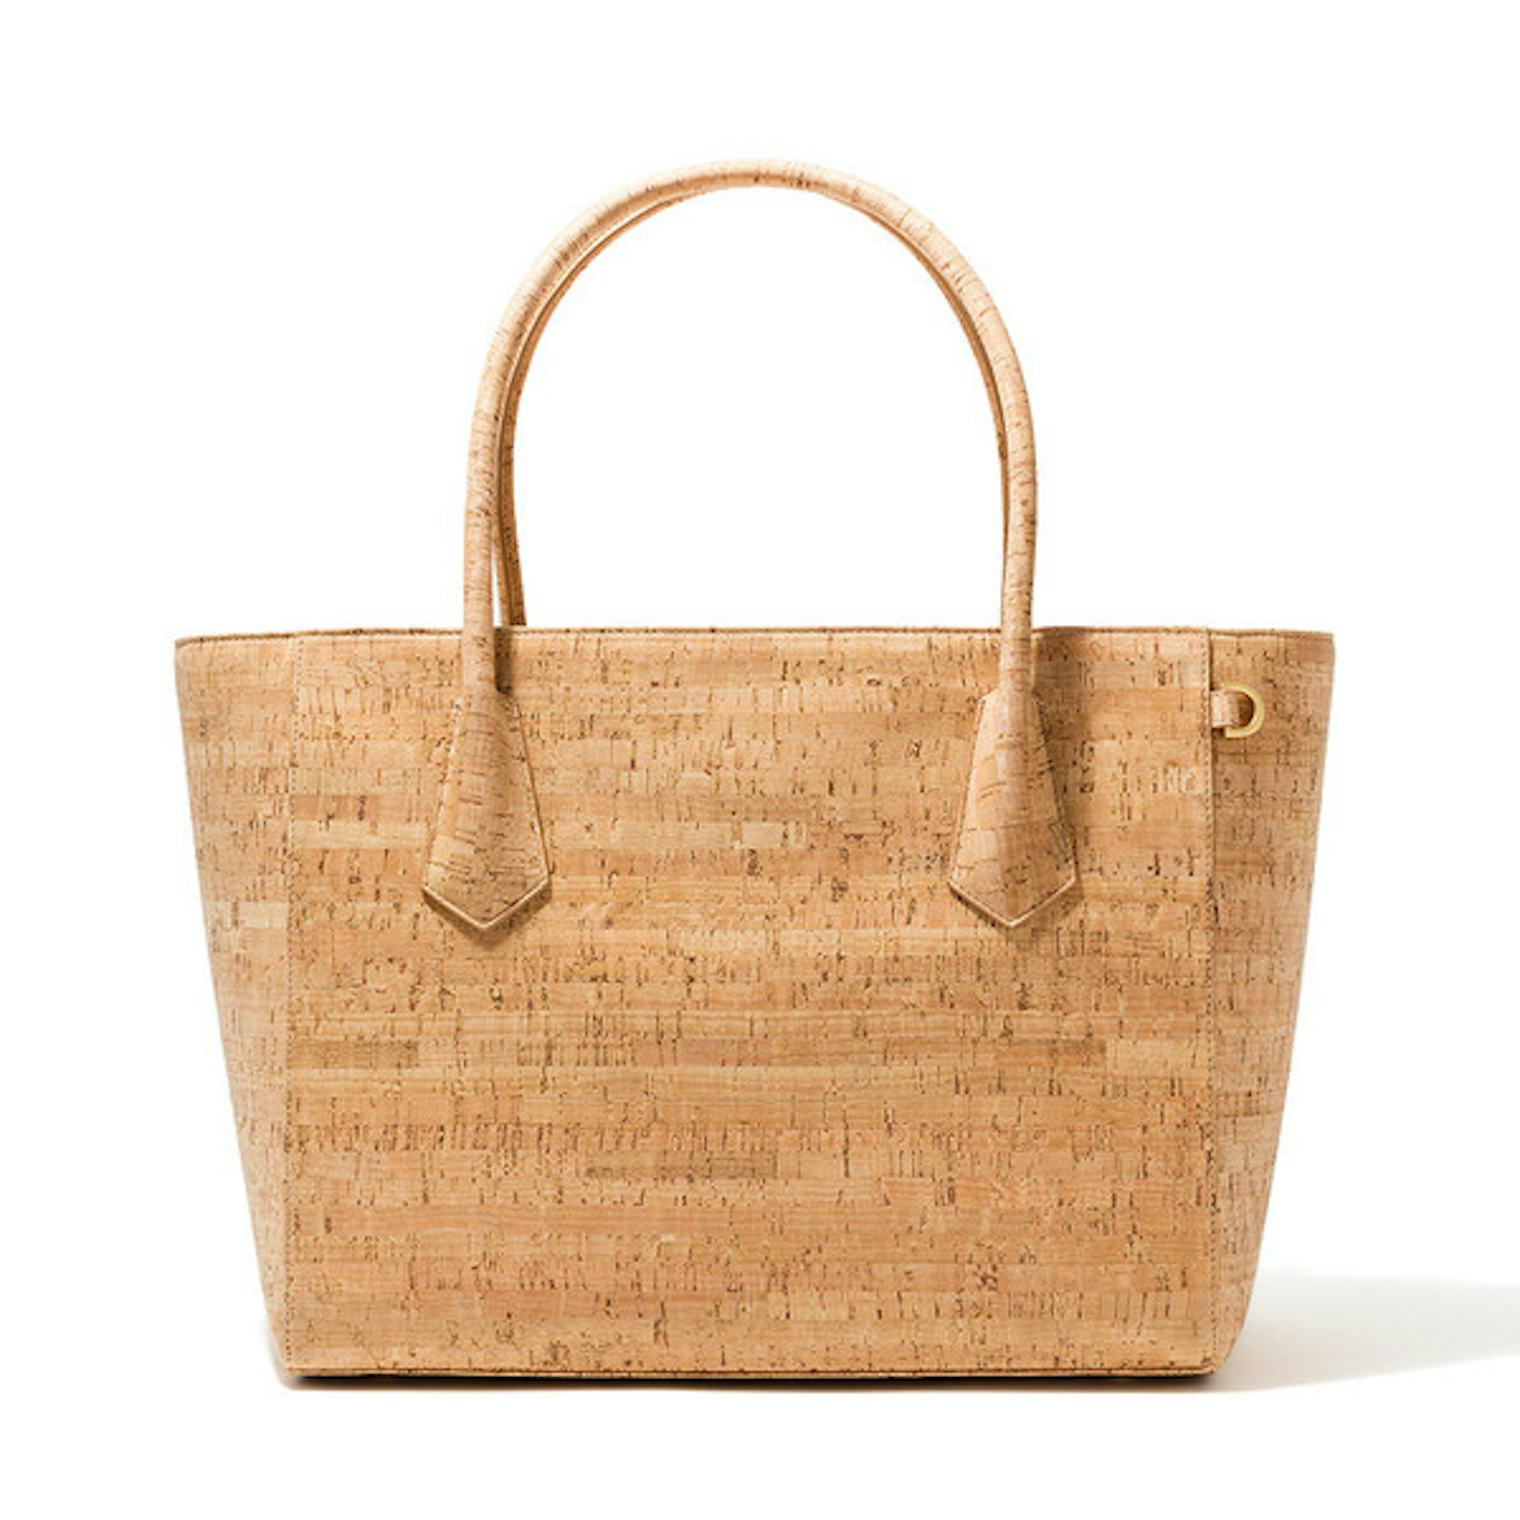 What Purse Should You Bring On Vacation? Here Are 16 You Should ...